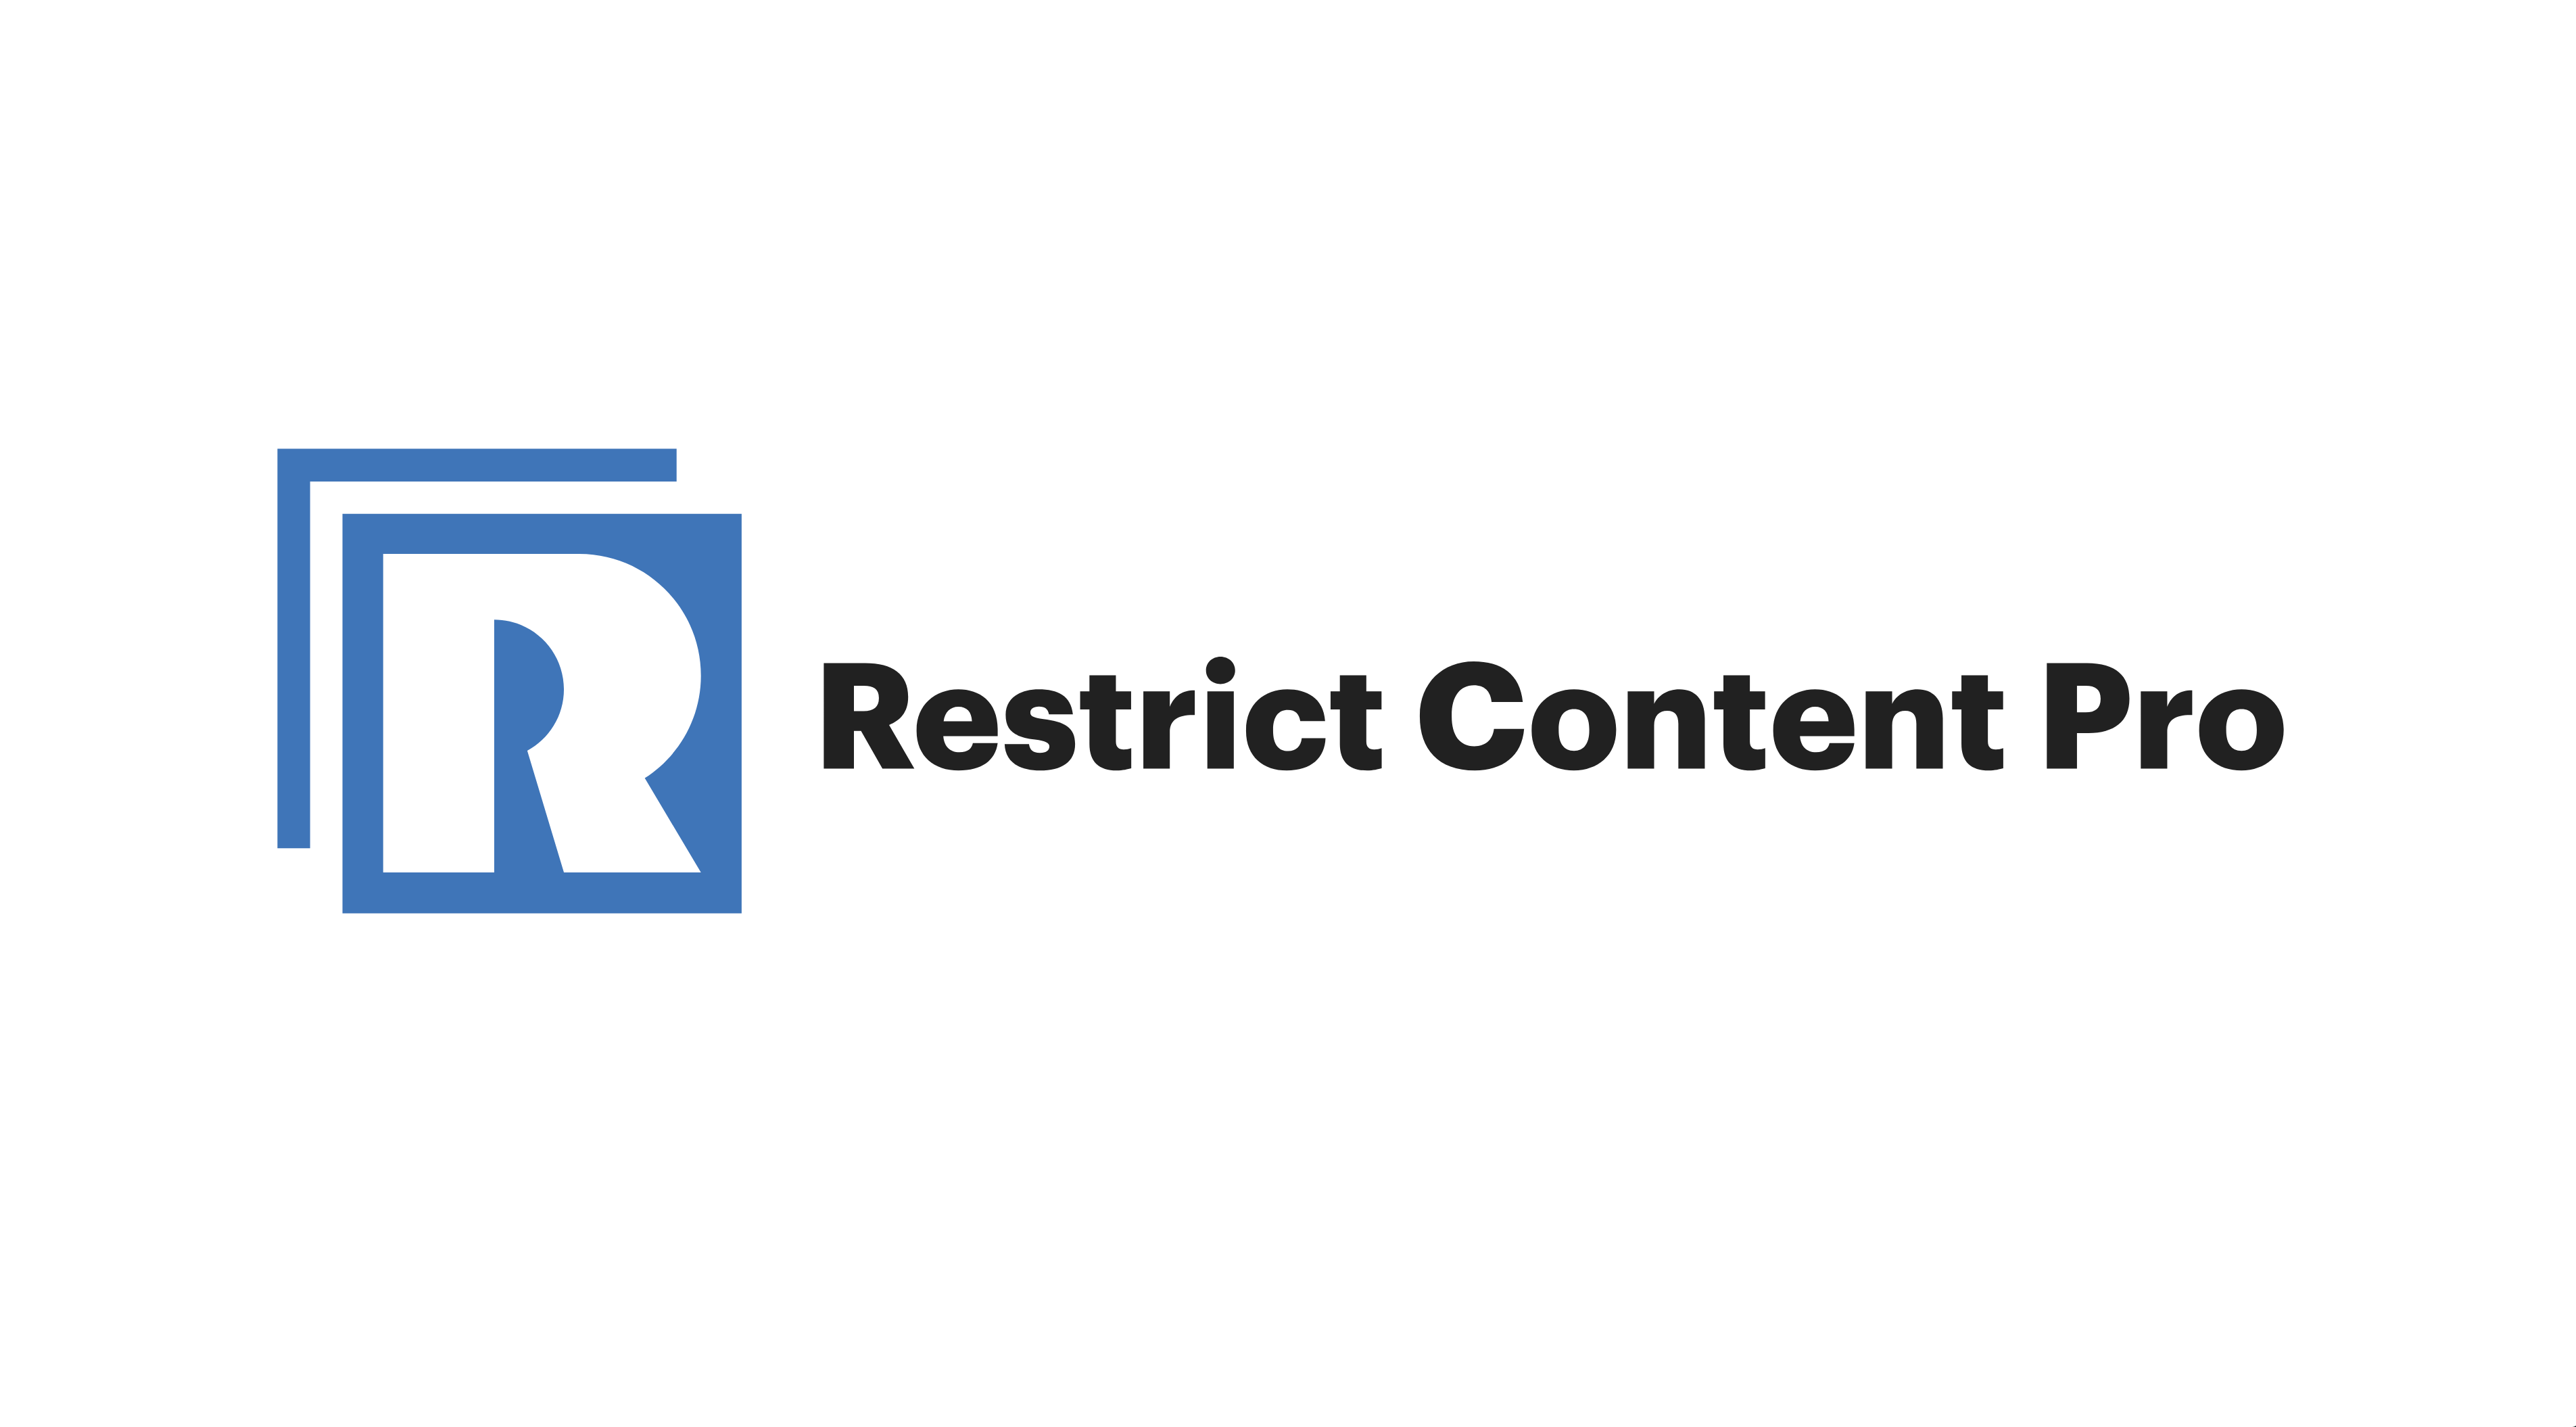 Bulk Clearing Expiration Dates in Restrict Content Pro